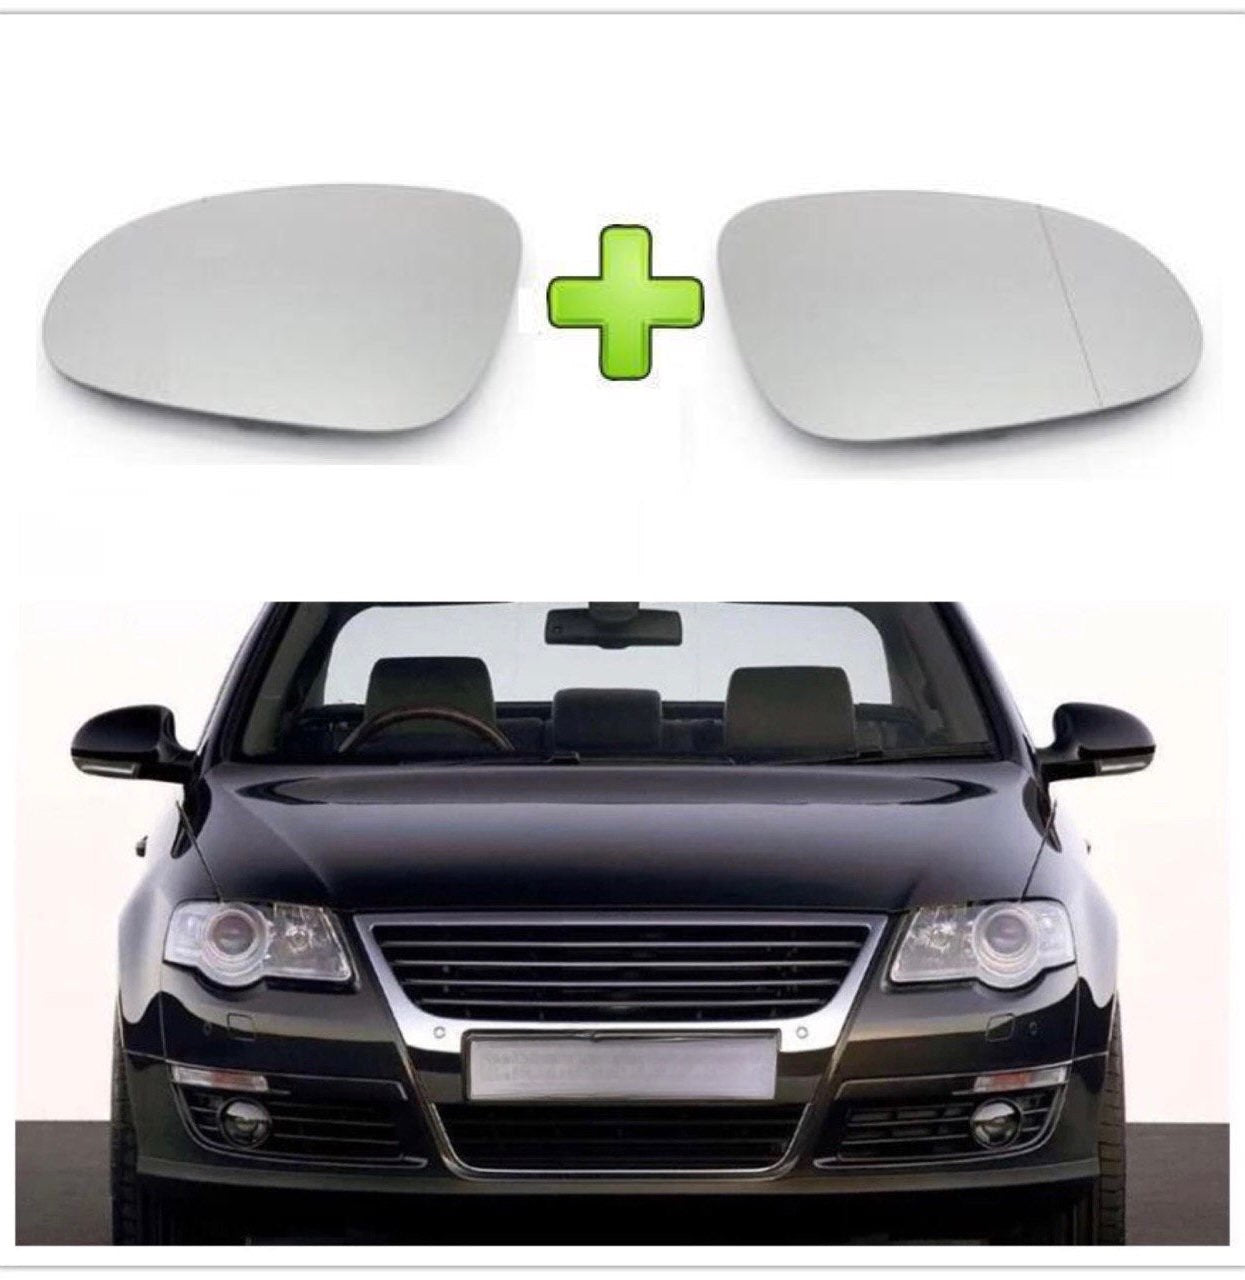 Mirror Glass Set LEFT + RIGHT For VW PASSAT B6 B5.5 Pair of Blind Spot Mirror Glass Clip On Type Part Numbers: 5M0857522H  5M0857522 H 5M0 857 522 H 425 178-1 4251781 425188 1 

ОЕ number

OE reference number(s) comparable with the original spare part number:

OE 5M0857522F — VW

OE 1K0857522 — VW

OE 3B1857522 — VW

OE 7M3857522E — VW  7M3857522 E  7M3 857 522 E

OE 5M0 857 522 F — VW 5M0857522 F

OE 1K0 857 522 — VW

OE 3B1 857 522 — VW